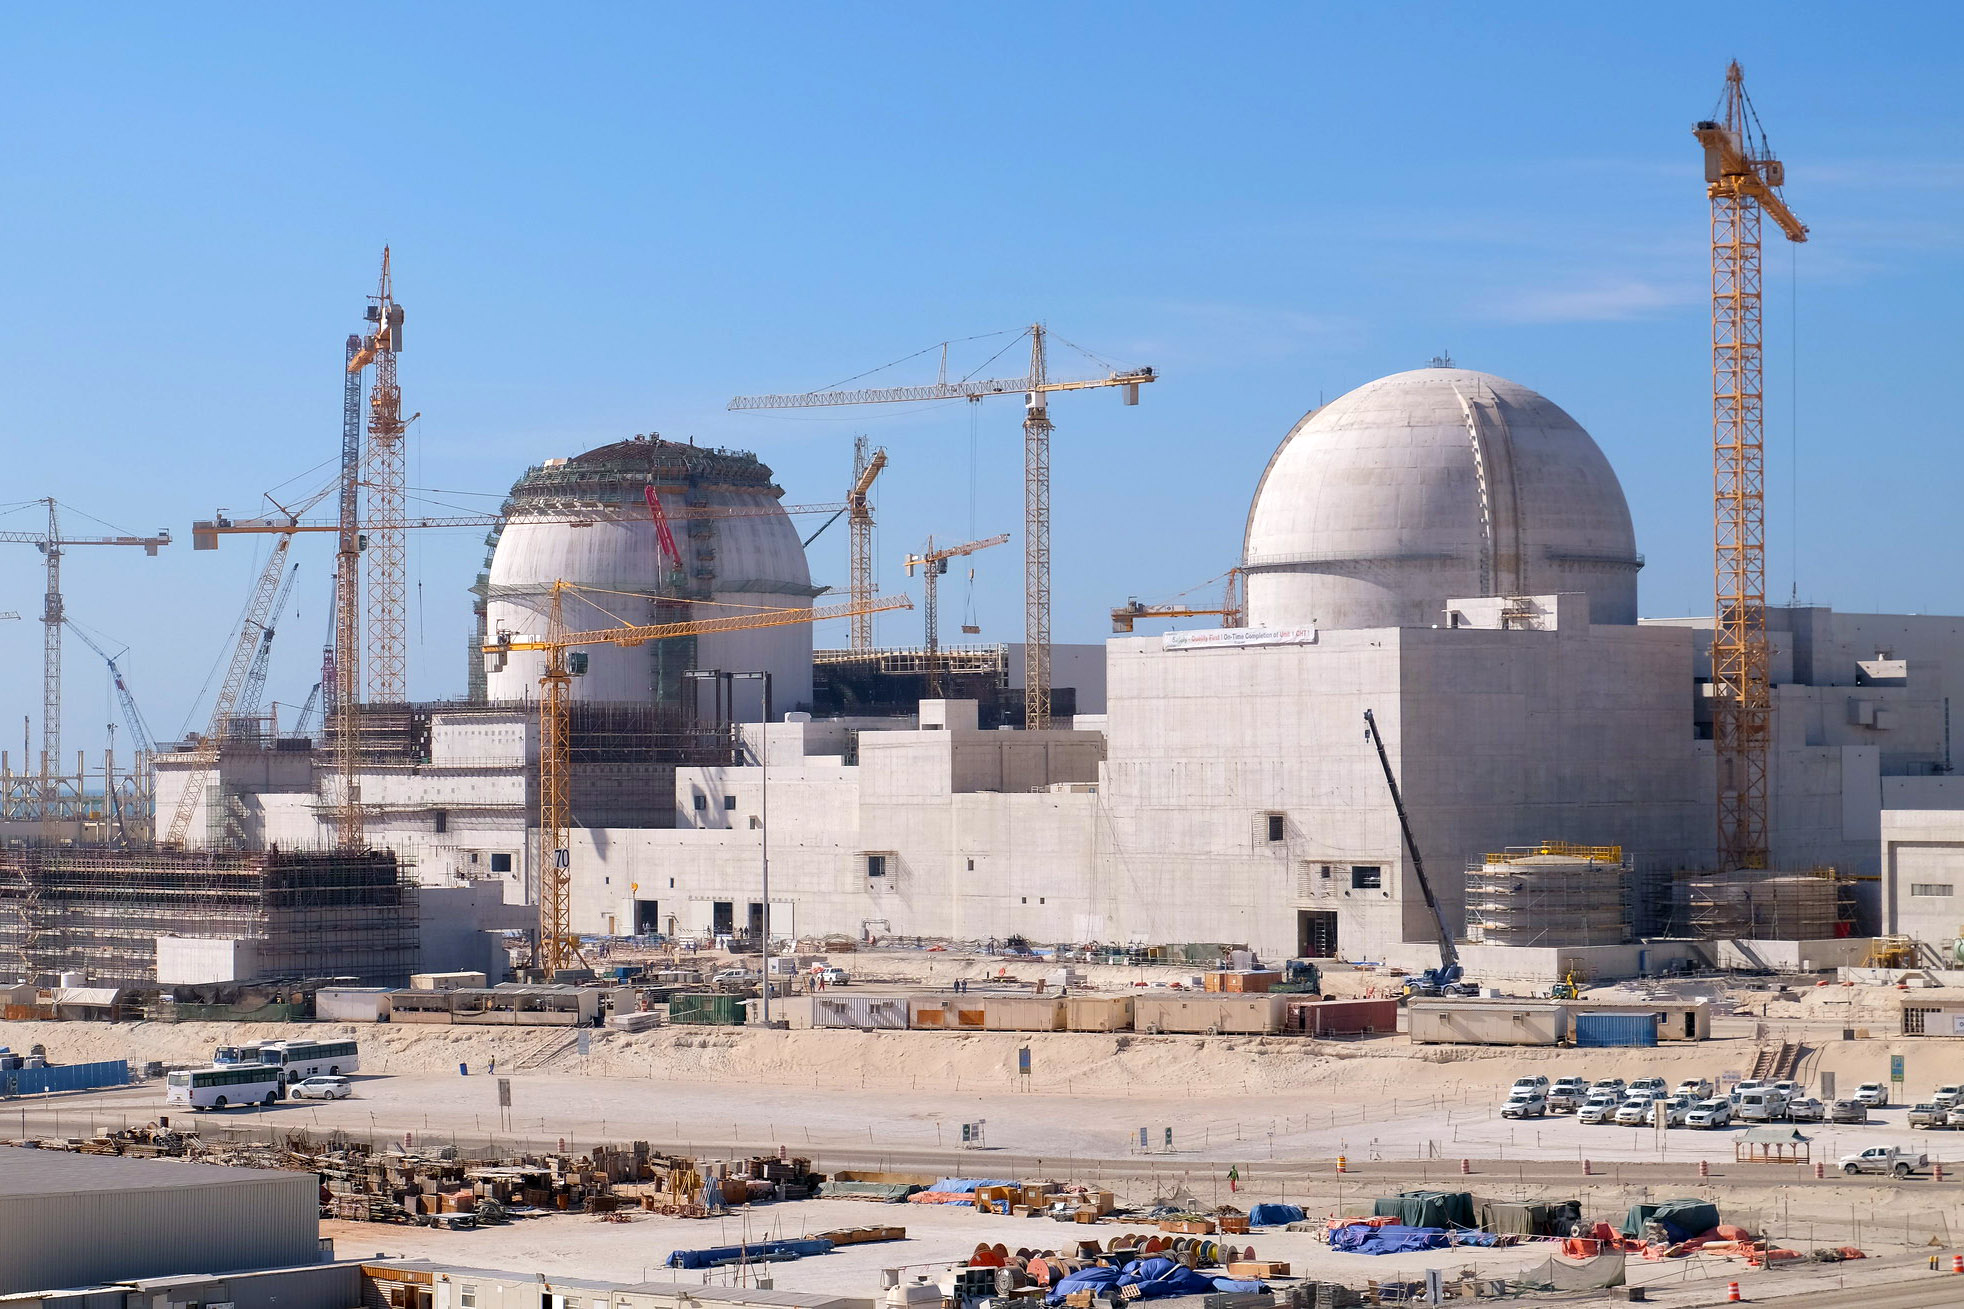 Nuclear reactors in the UAE under construction